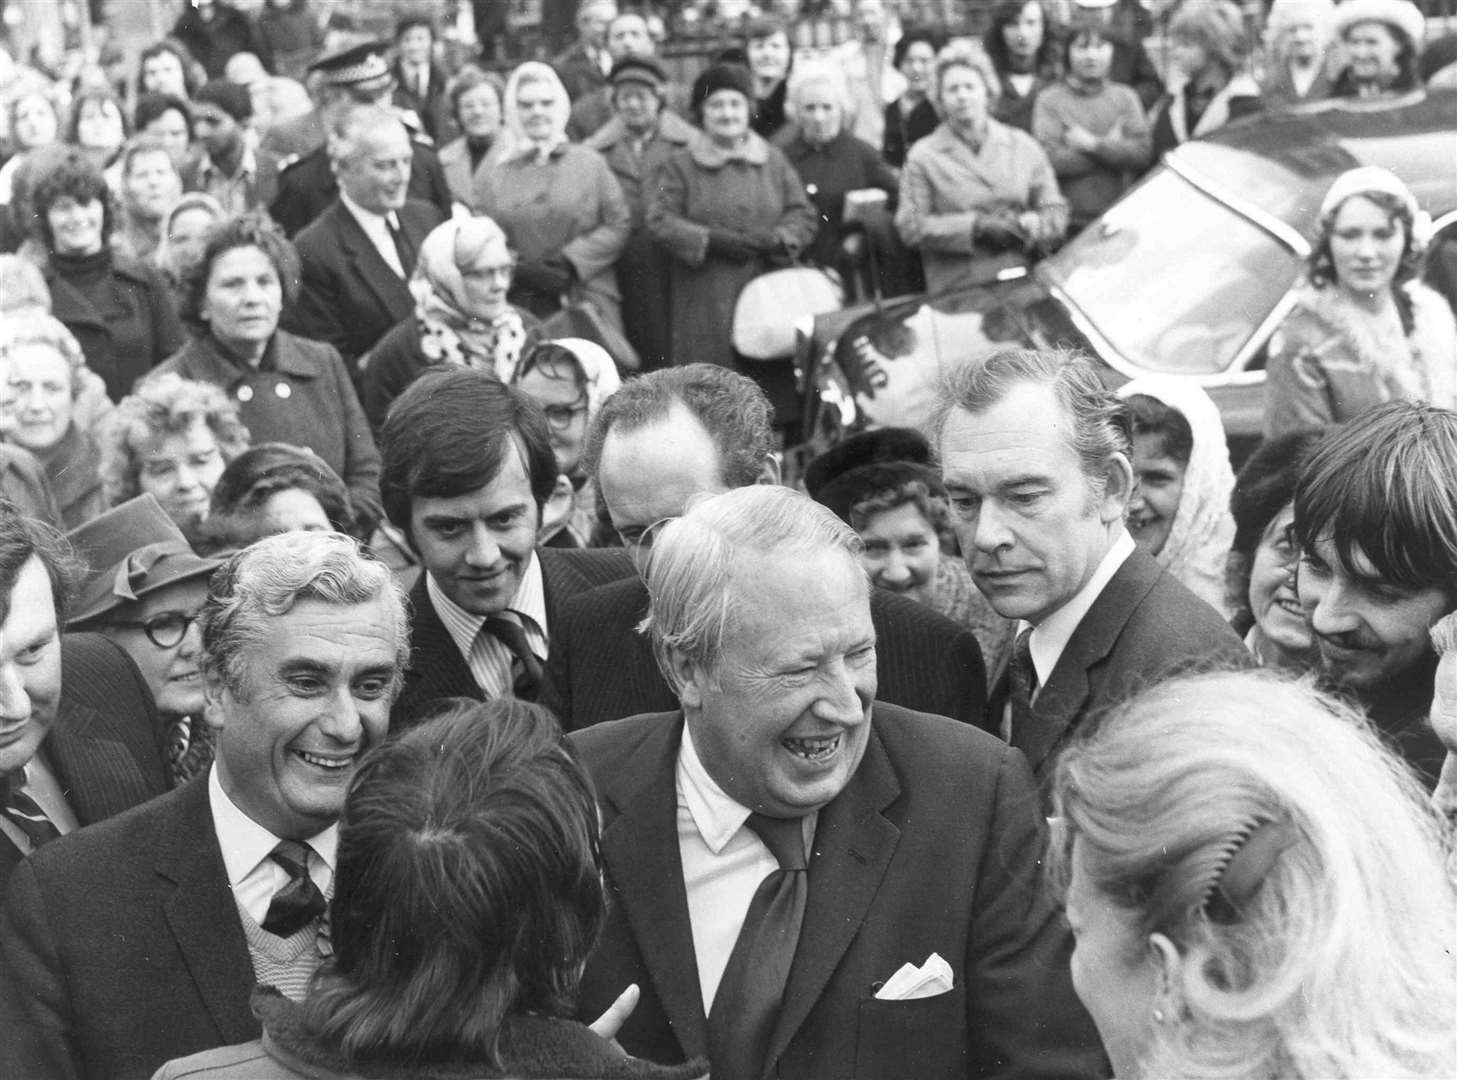 Prime Minister Edward Heath in good humour on the campaign trail in February 1974 on a visit to Gravesend. But the result would end in a hung parliament and see Labour's Harold Wilson become Prime Minister once again